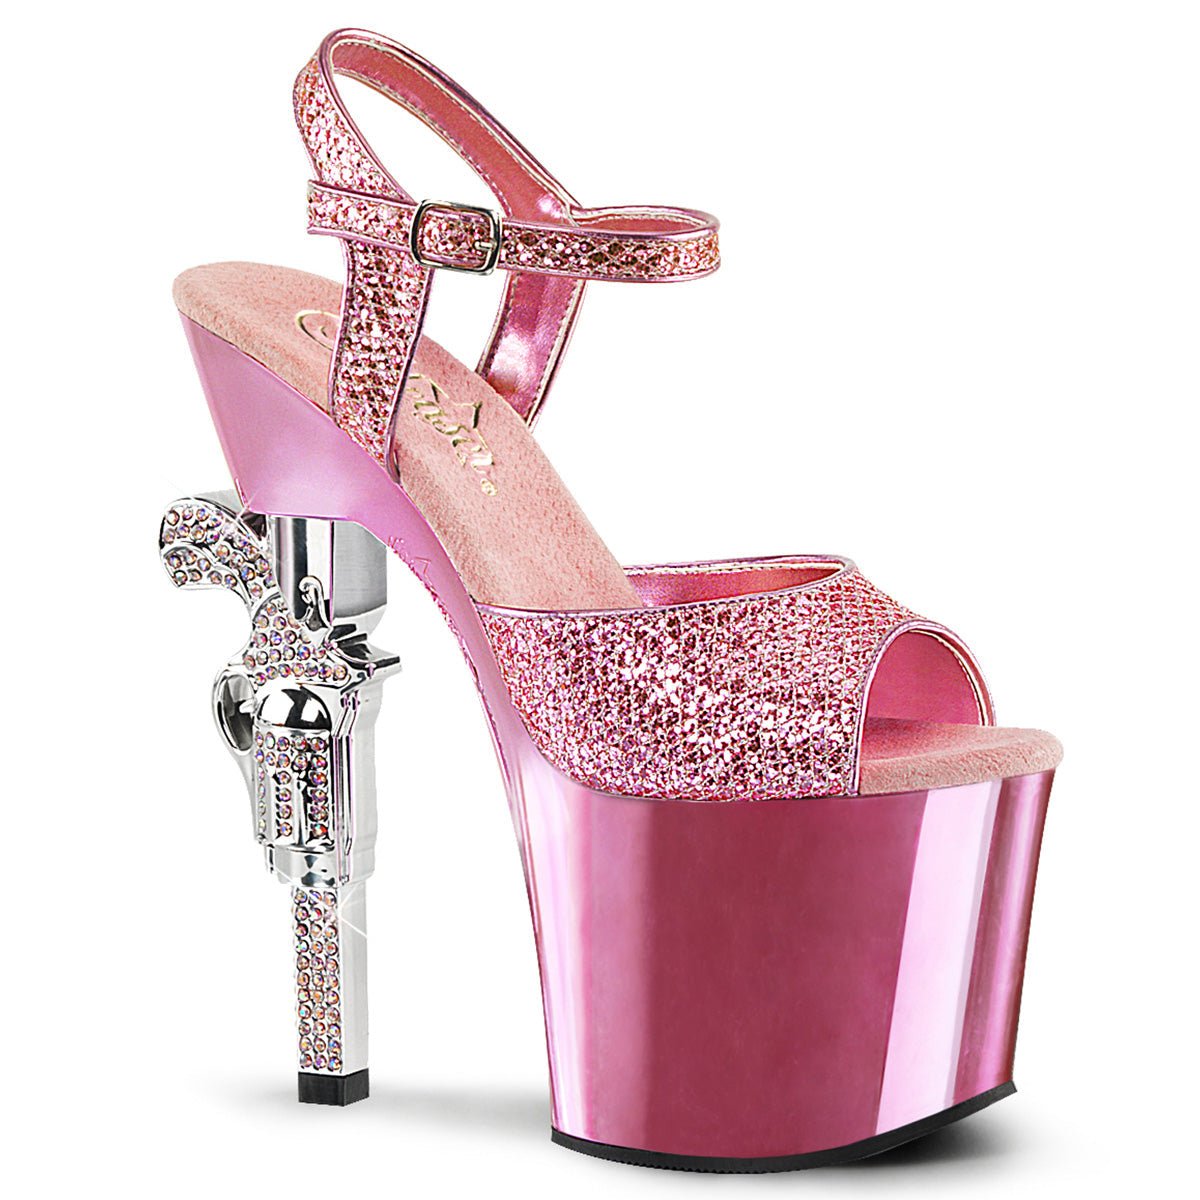 Clearance Pleaser Revolver 709G Pink Size 3UK/6USA - From Clearance Sold By Alternative Footwear